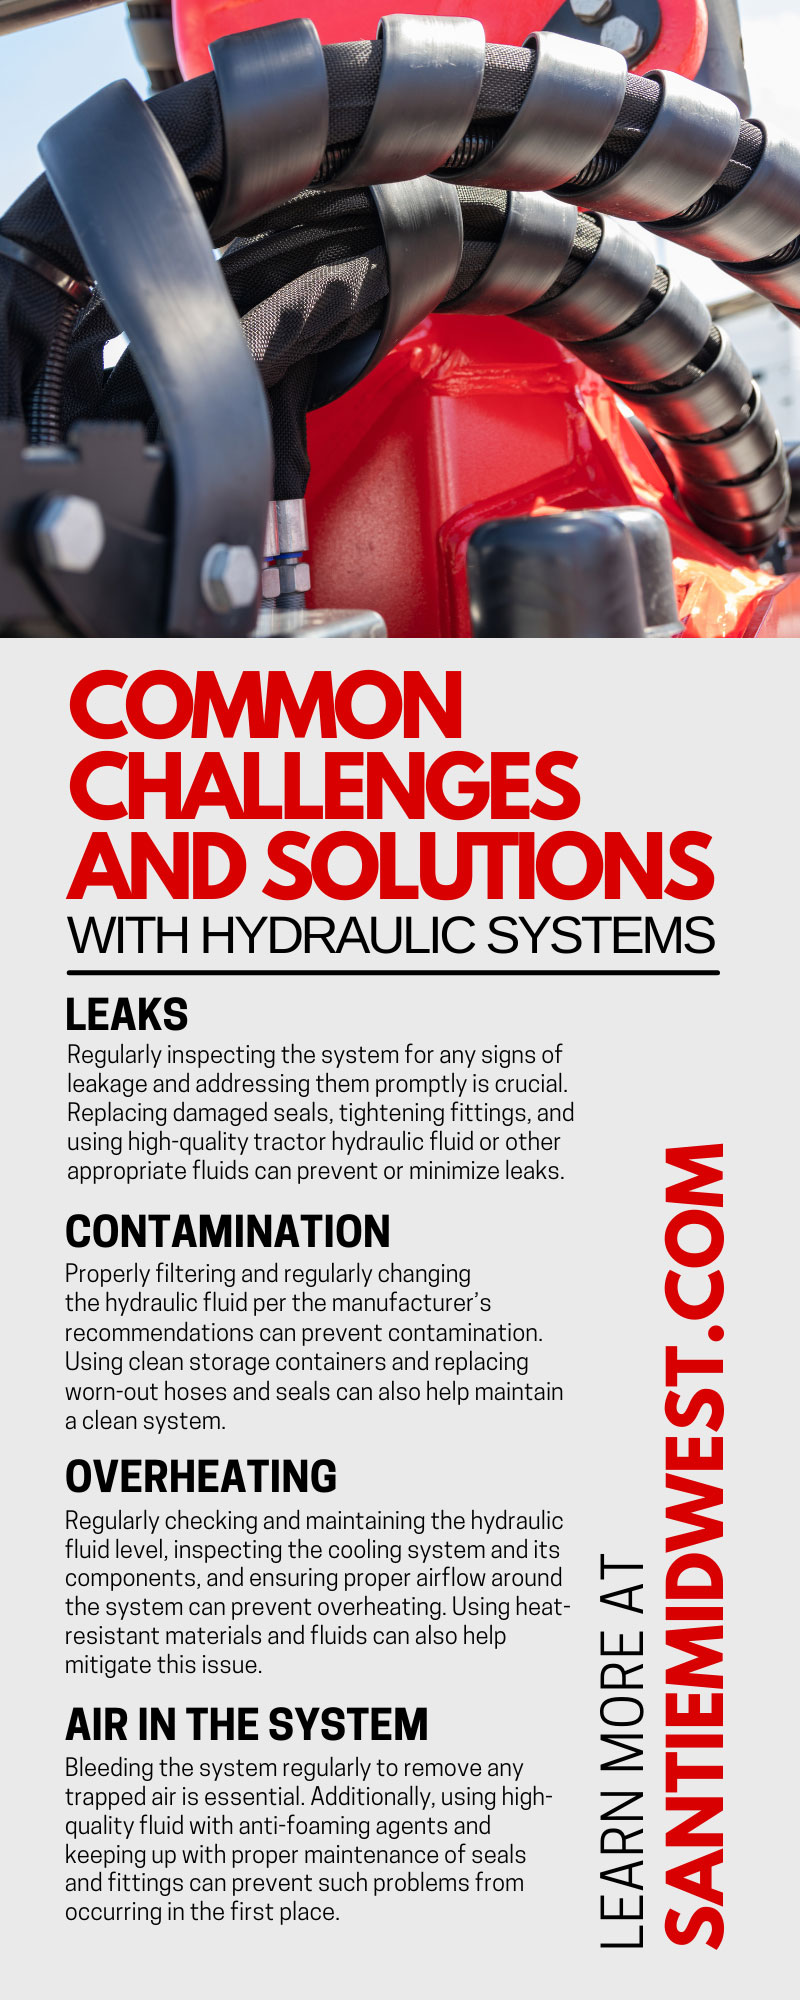 12 Common Challenges and Solutions With Hydraulic Systems